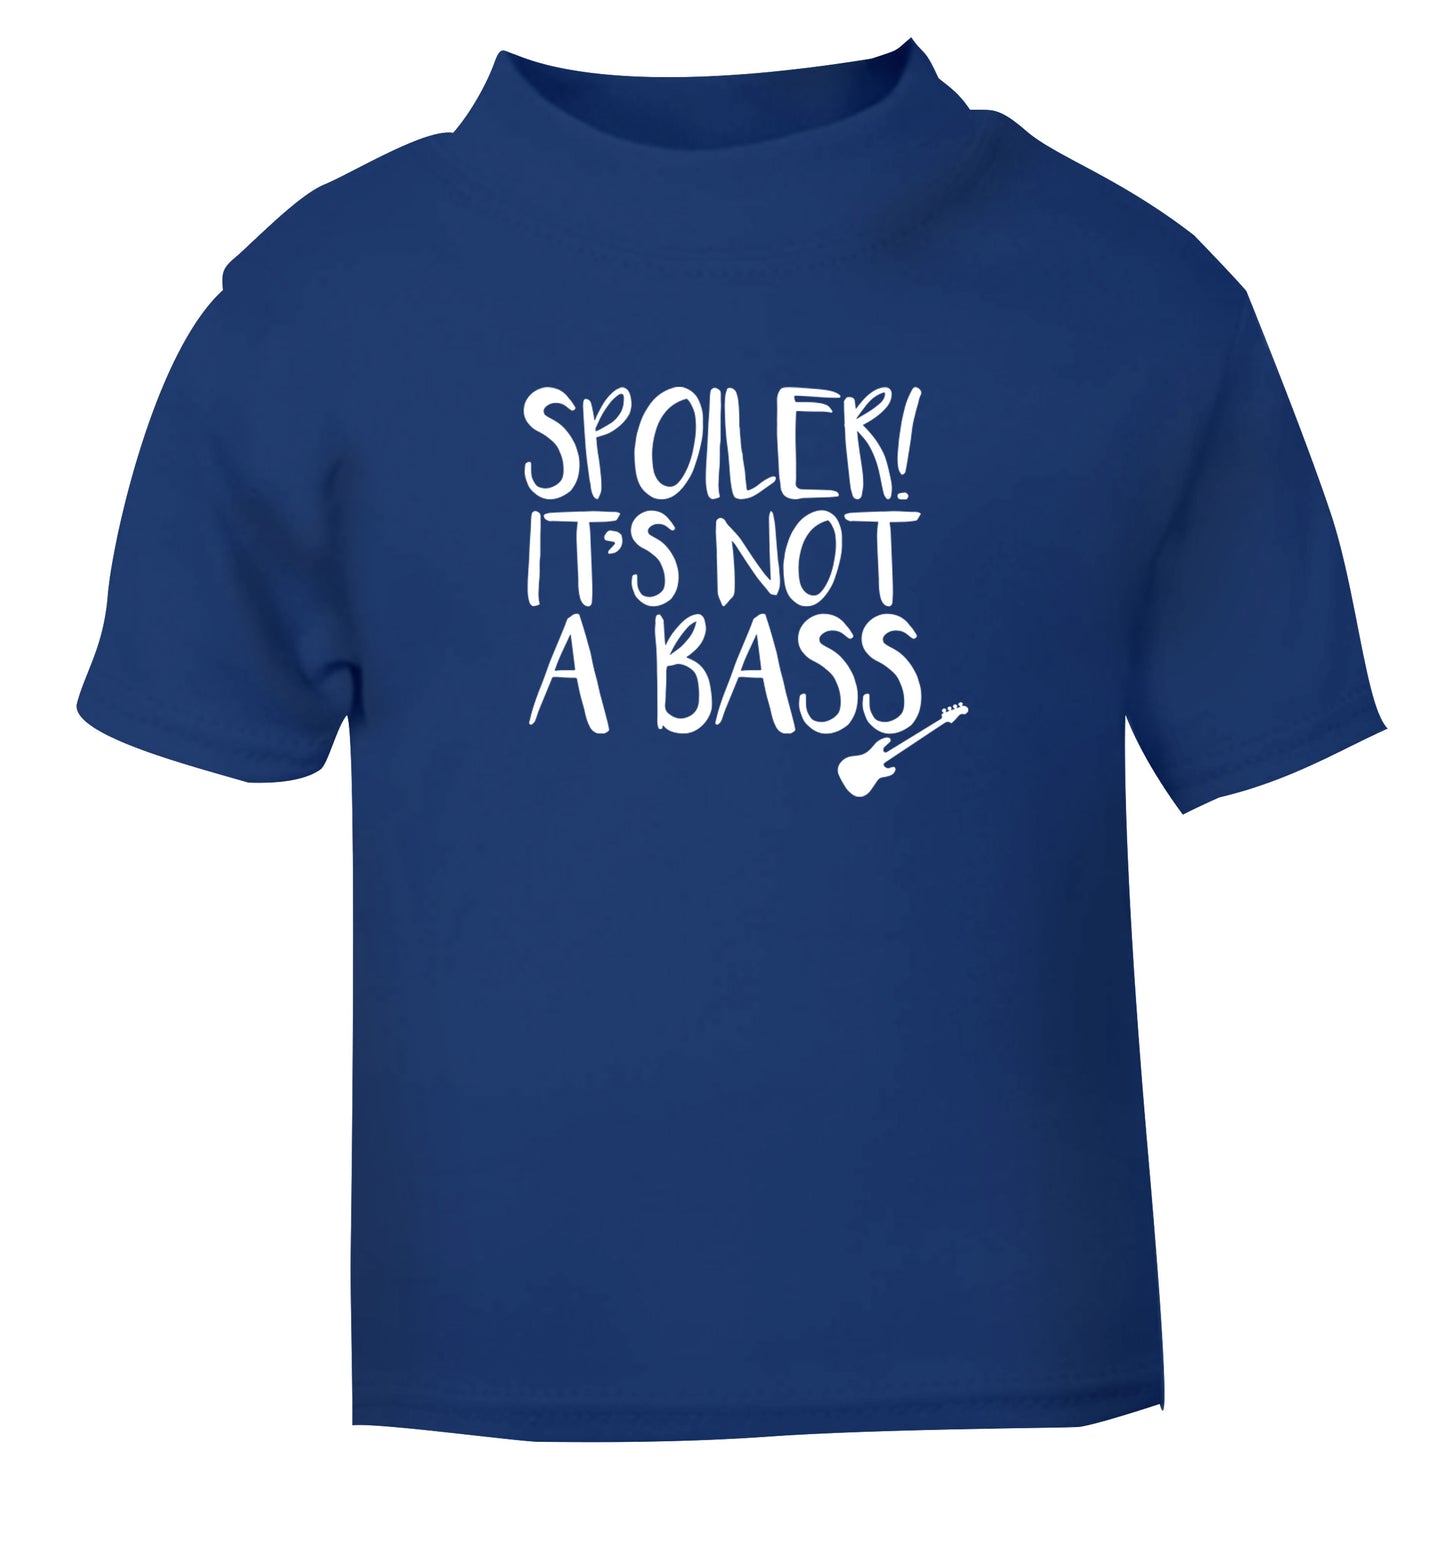 Spoiler it's not a bass blue Baby Toddler Tshirt 2 Years